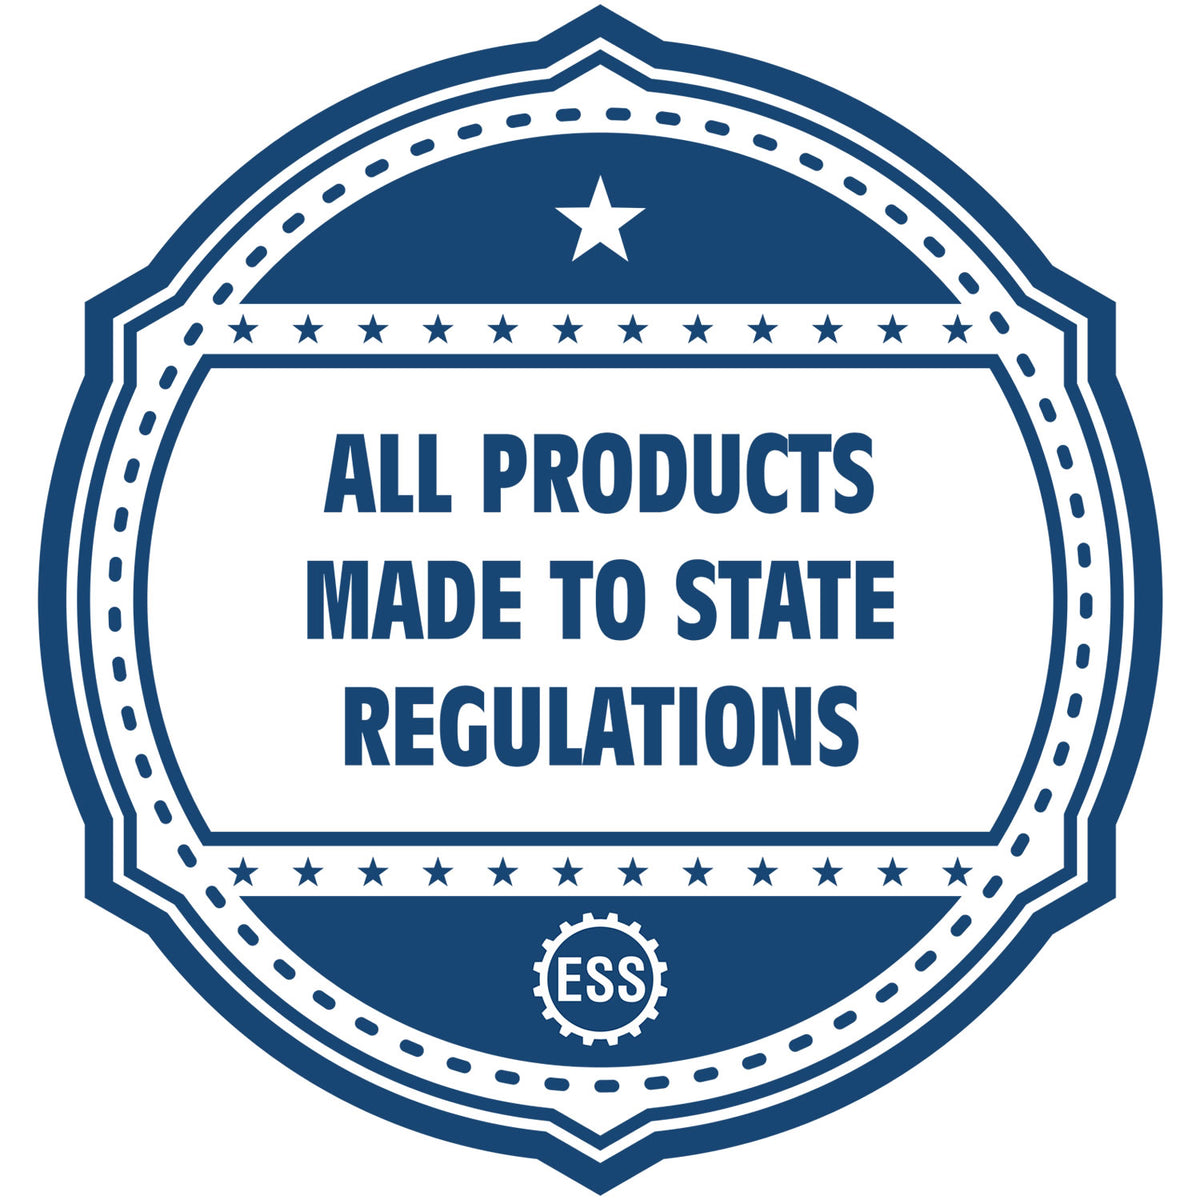 An icon or badge element for the Extended Long Reach Minnesota Architect Seal Embosser showing that this product is made in compliance with state regulations.